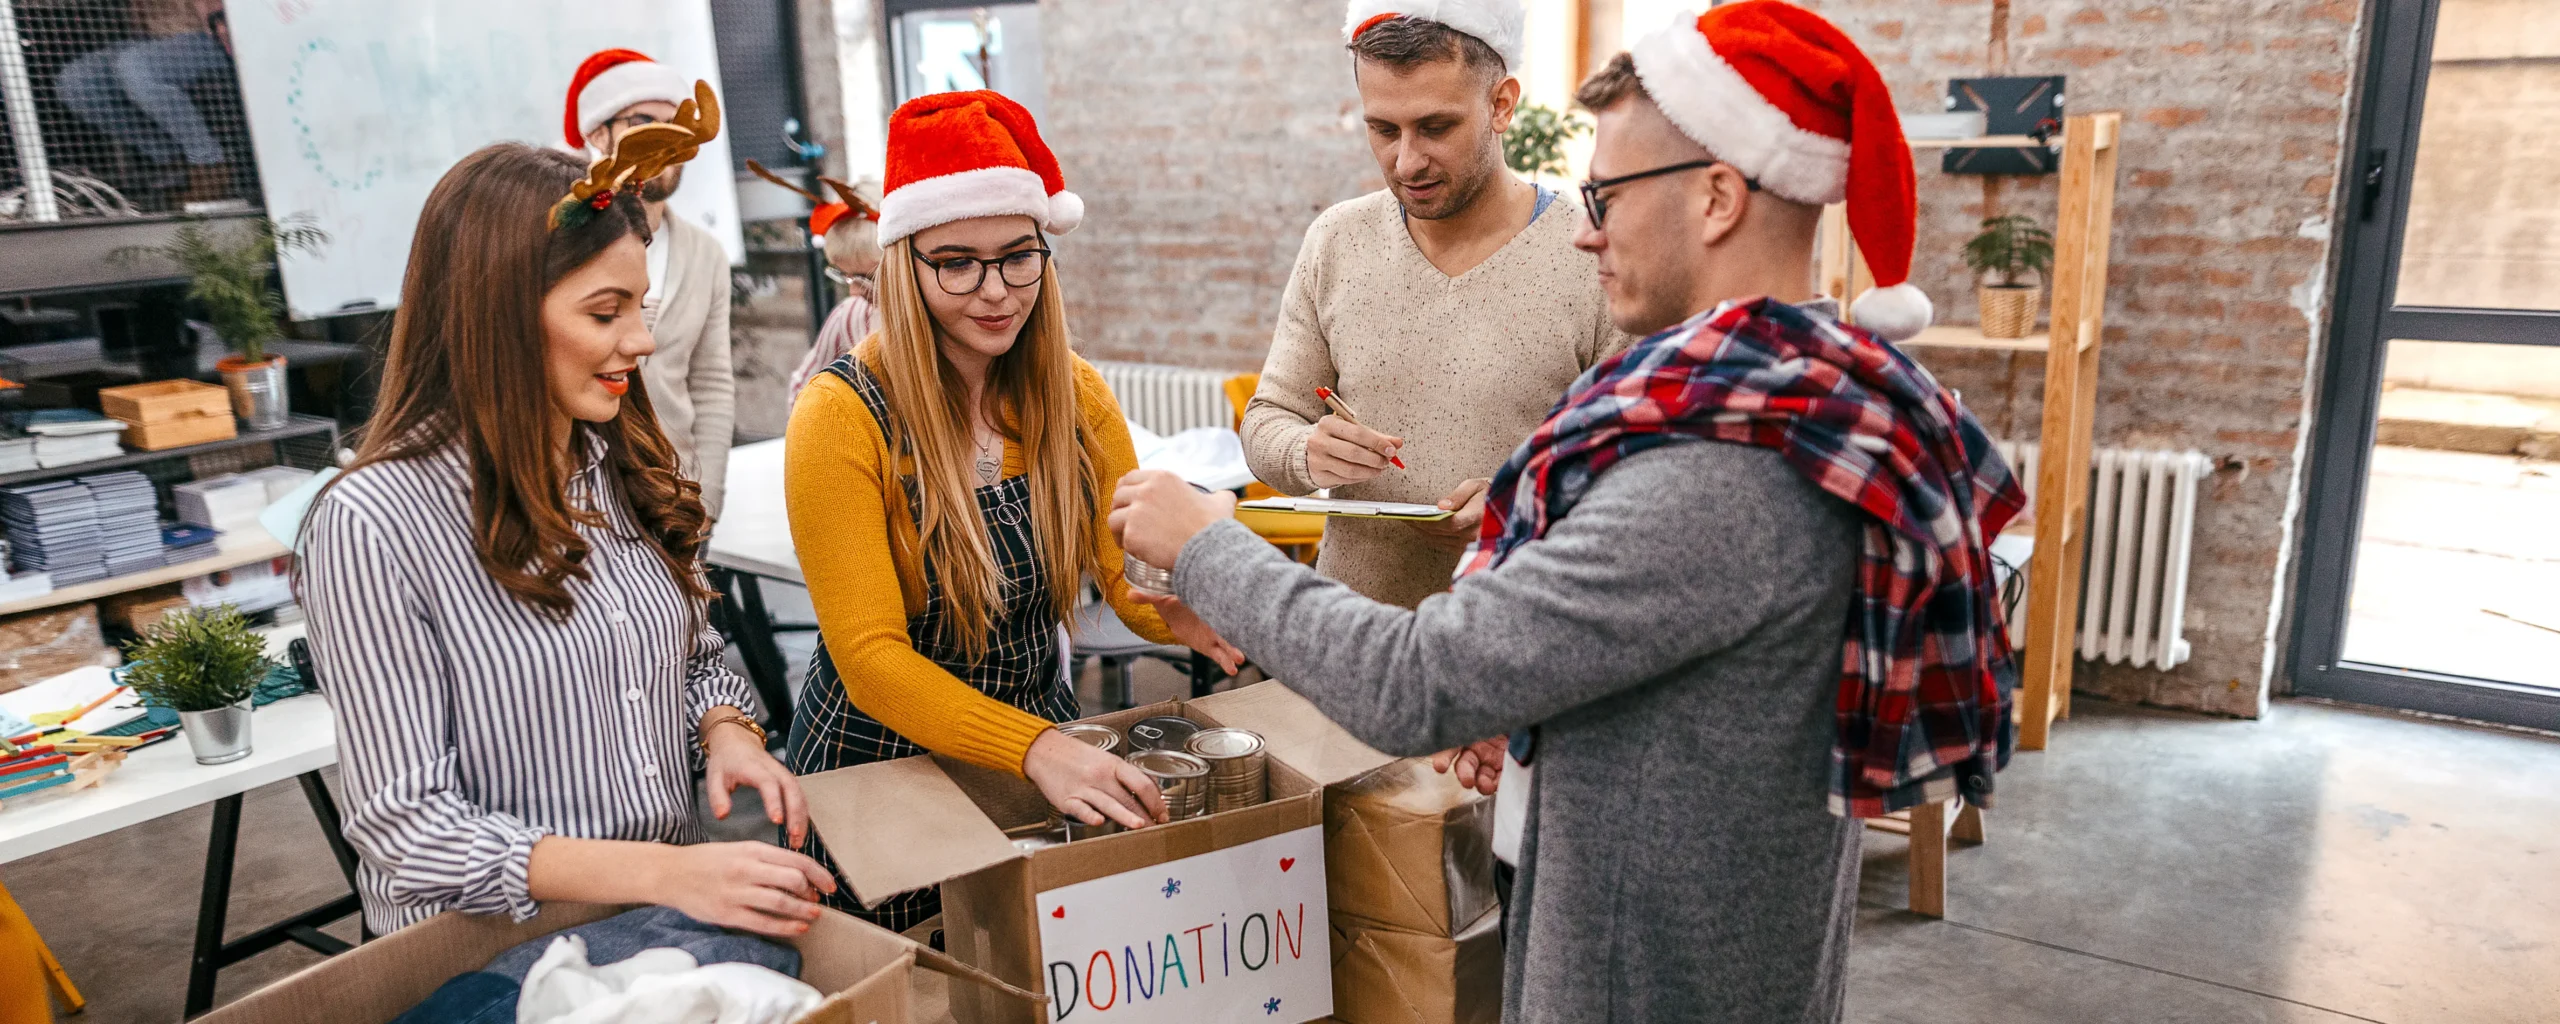 Embracing the spirit of giving in support of local charities